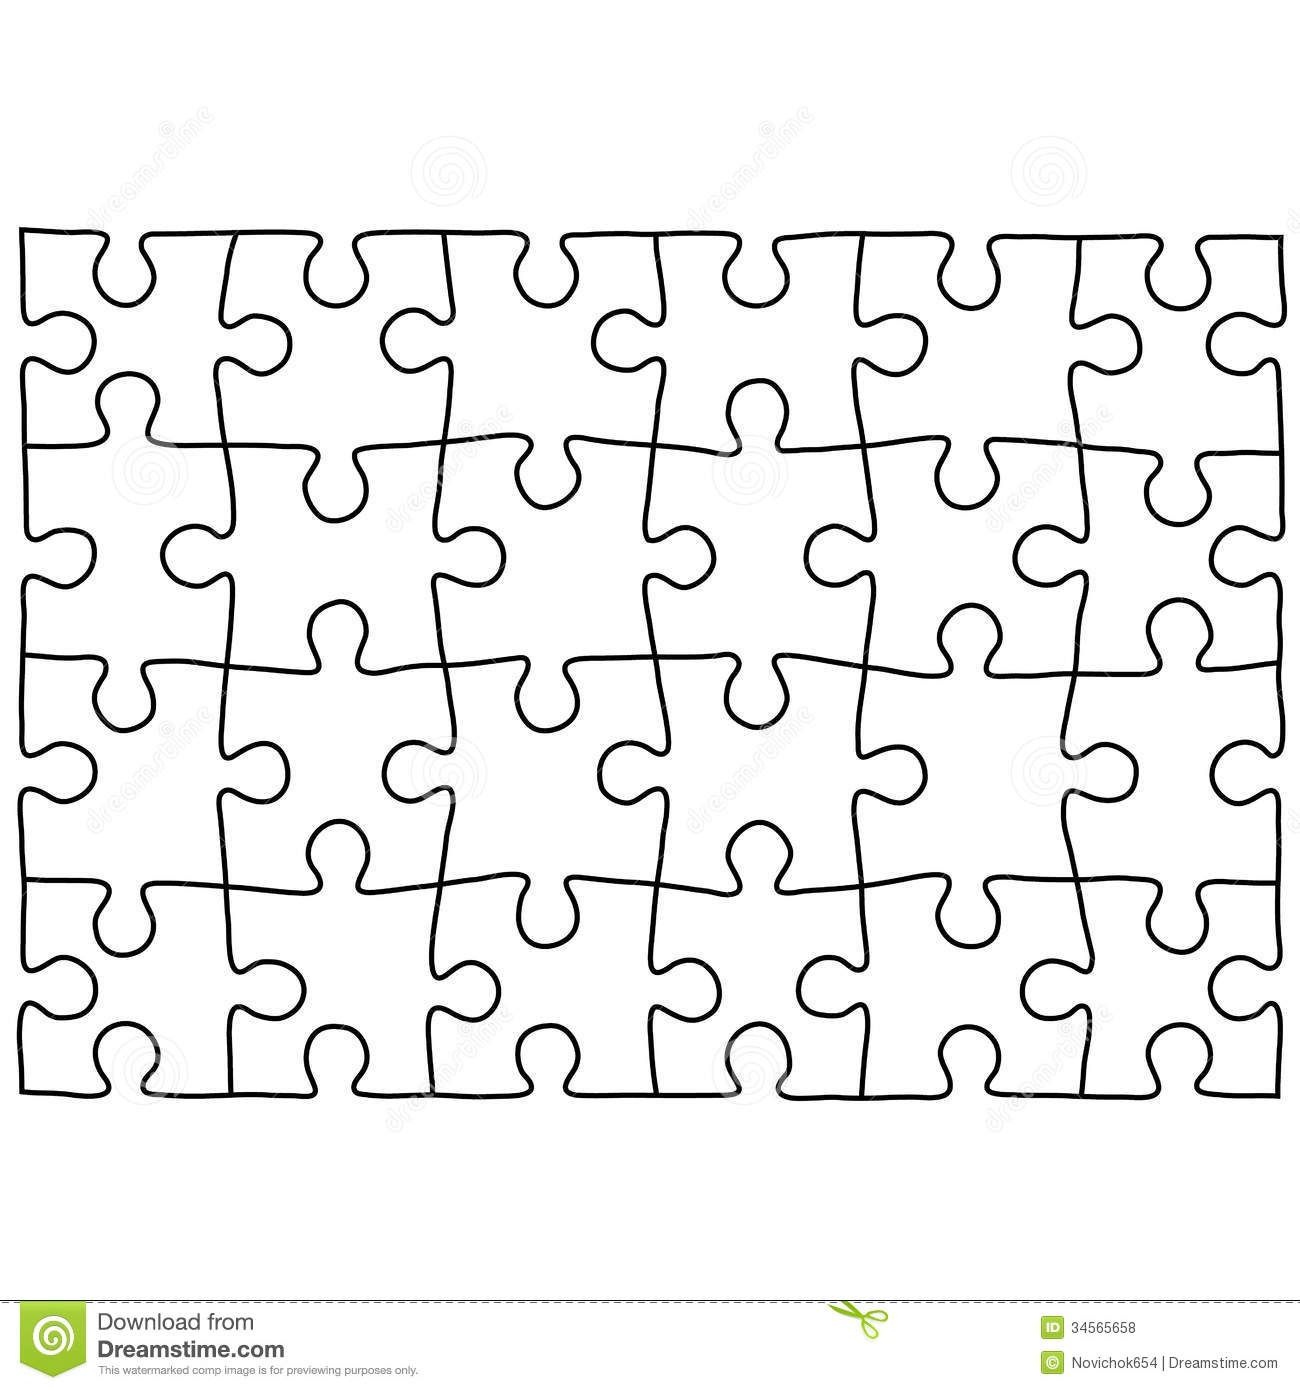 Jigsaw Puzzle Design Template | Free Puzzle Templates 1300.1390 - Puzzle Maker Printable Free